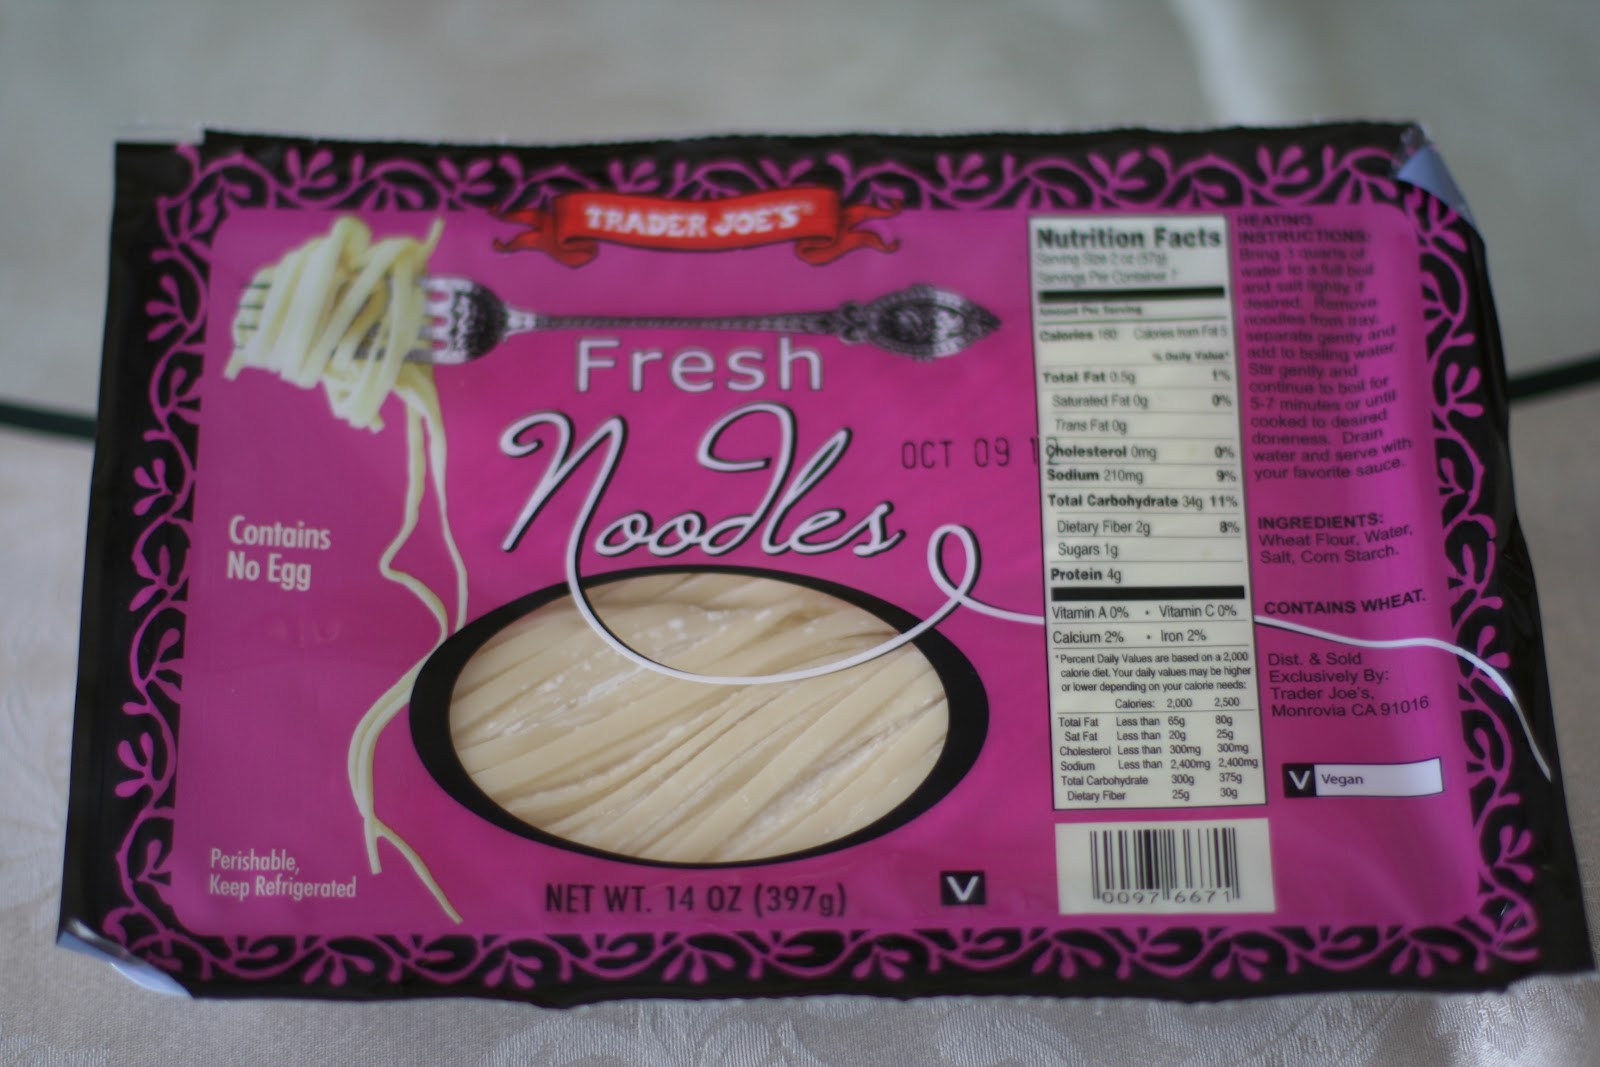 get allergy wise Product Review Trader Joe's Fresh Noodles, Eggfree